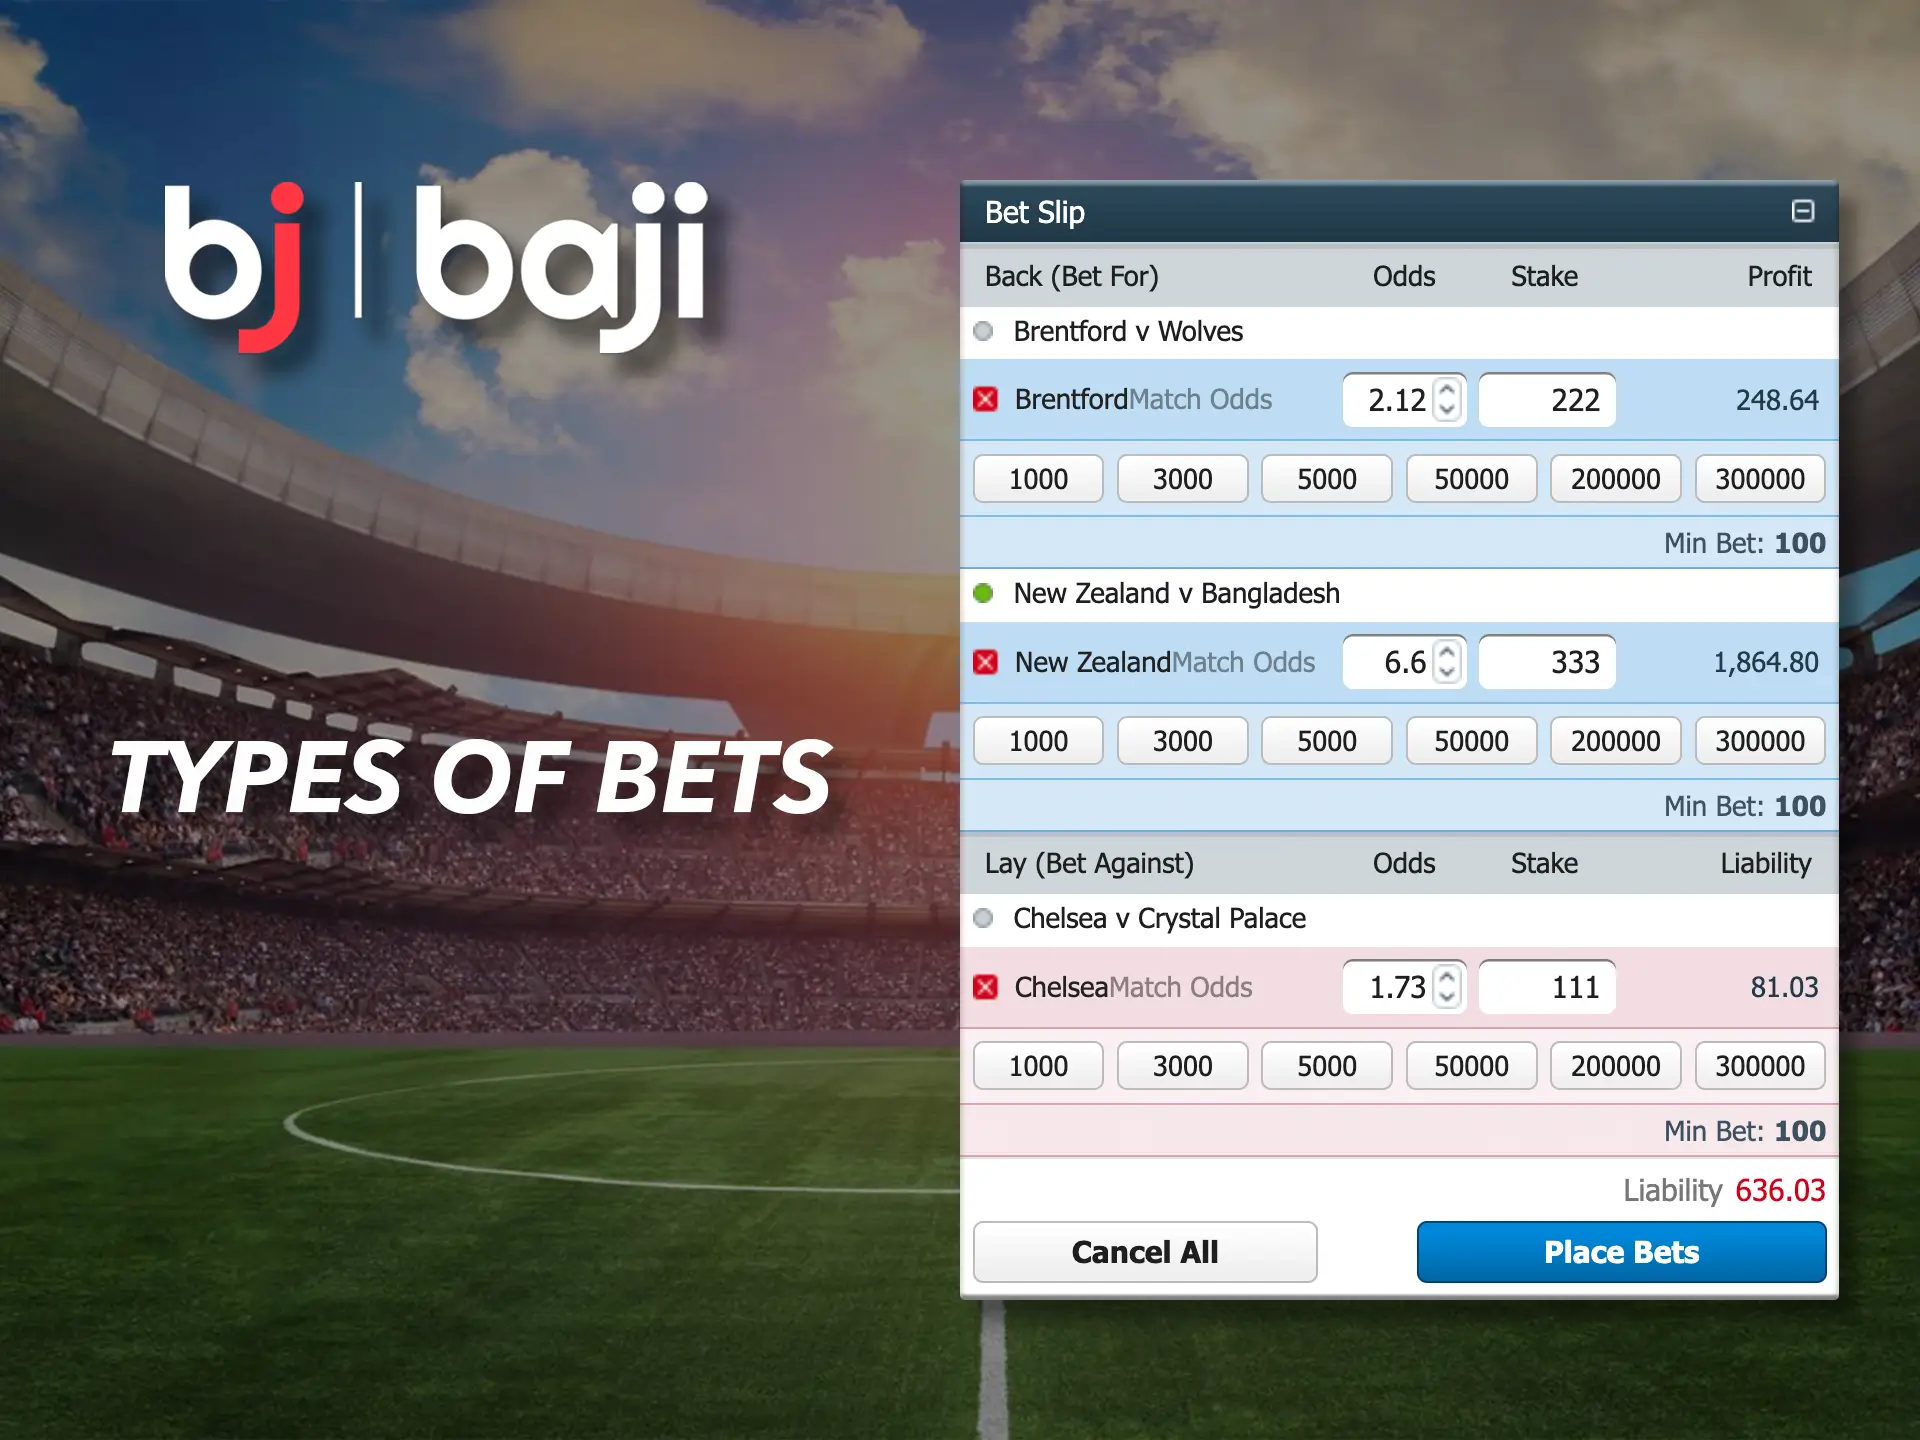 Choose the betting format that suits you and go for the wins with Baji.